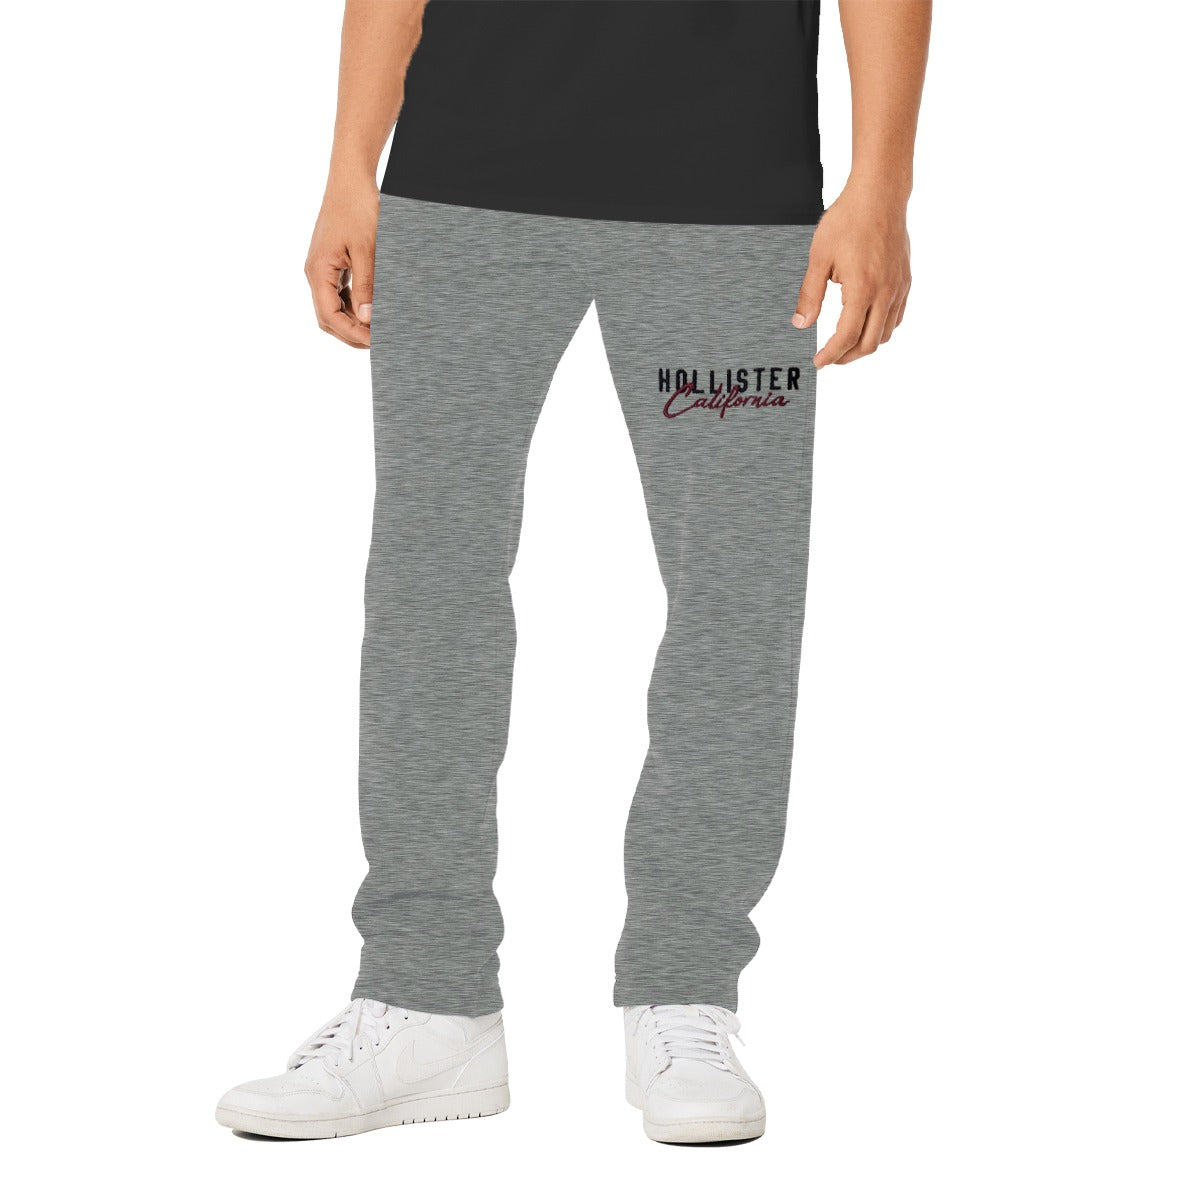 SIGNATURE EMBROIDERED SWEAT PANT